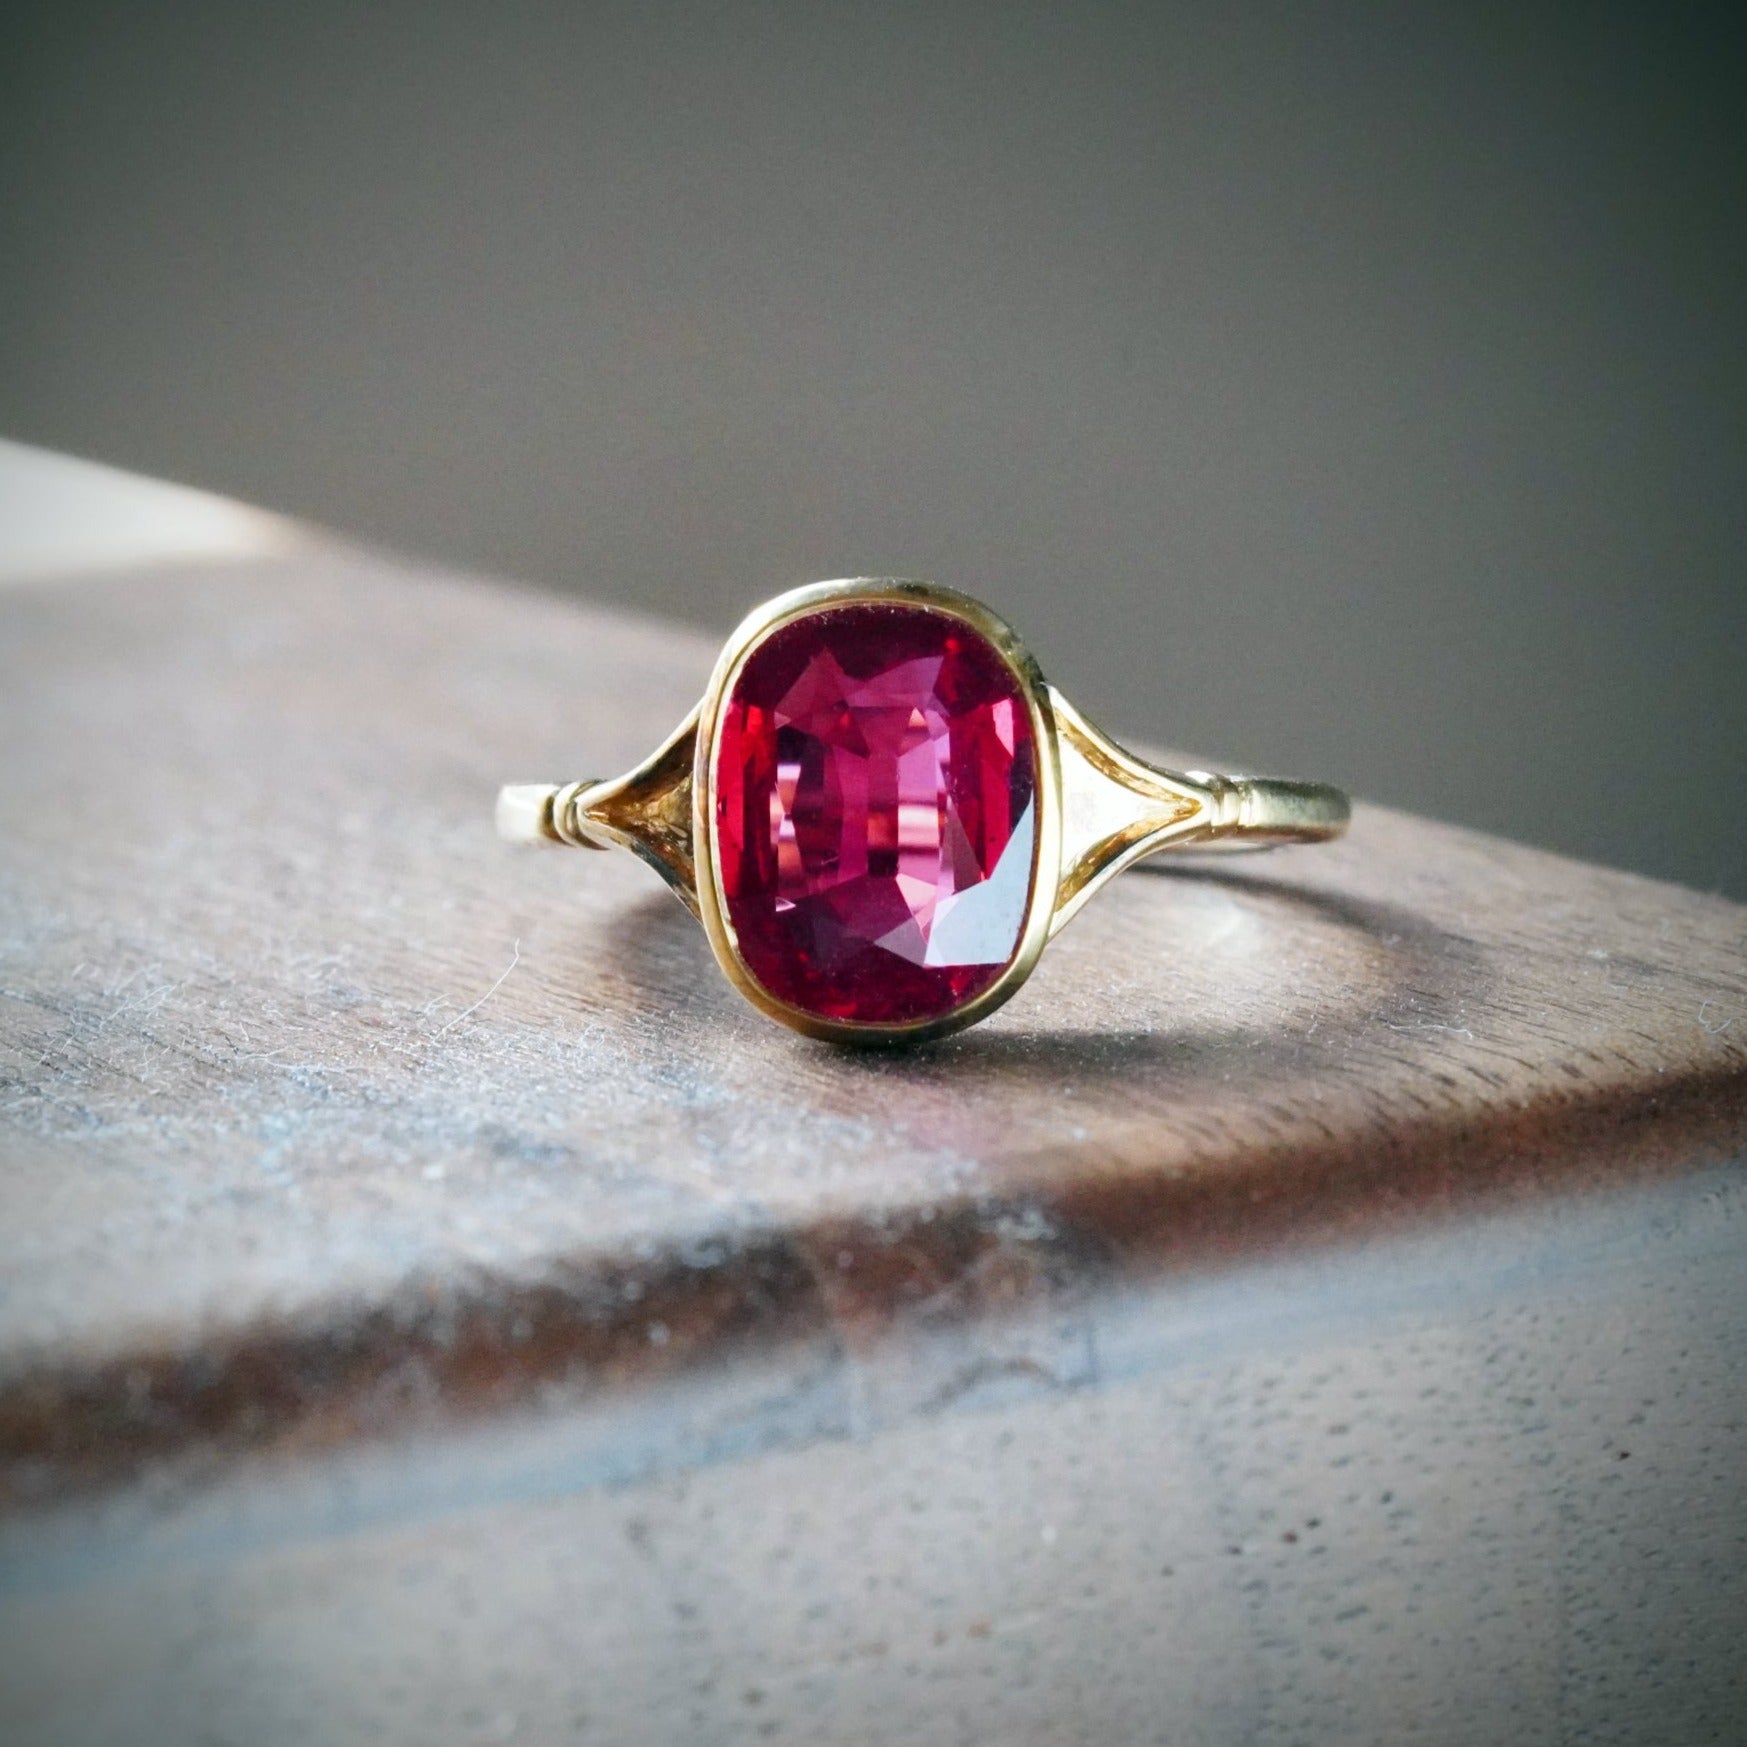  Jogani 2.75 CT Cherry-Red Spinel Ring 3 